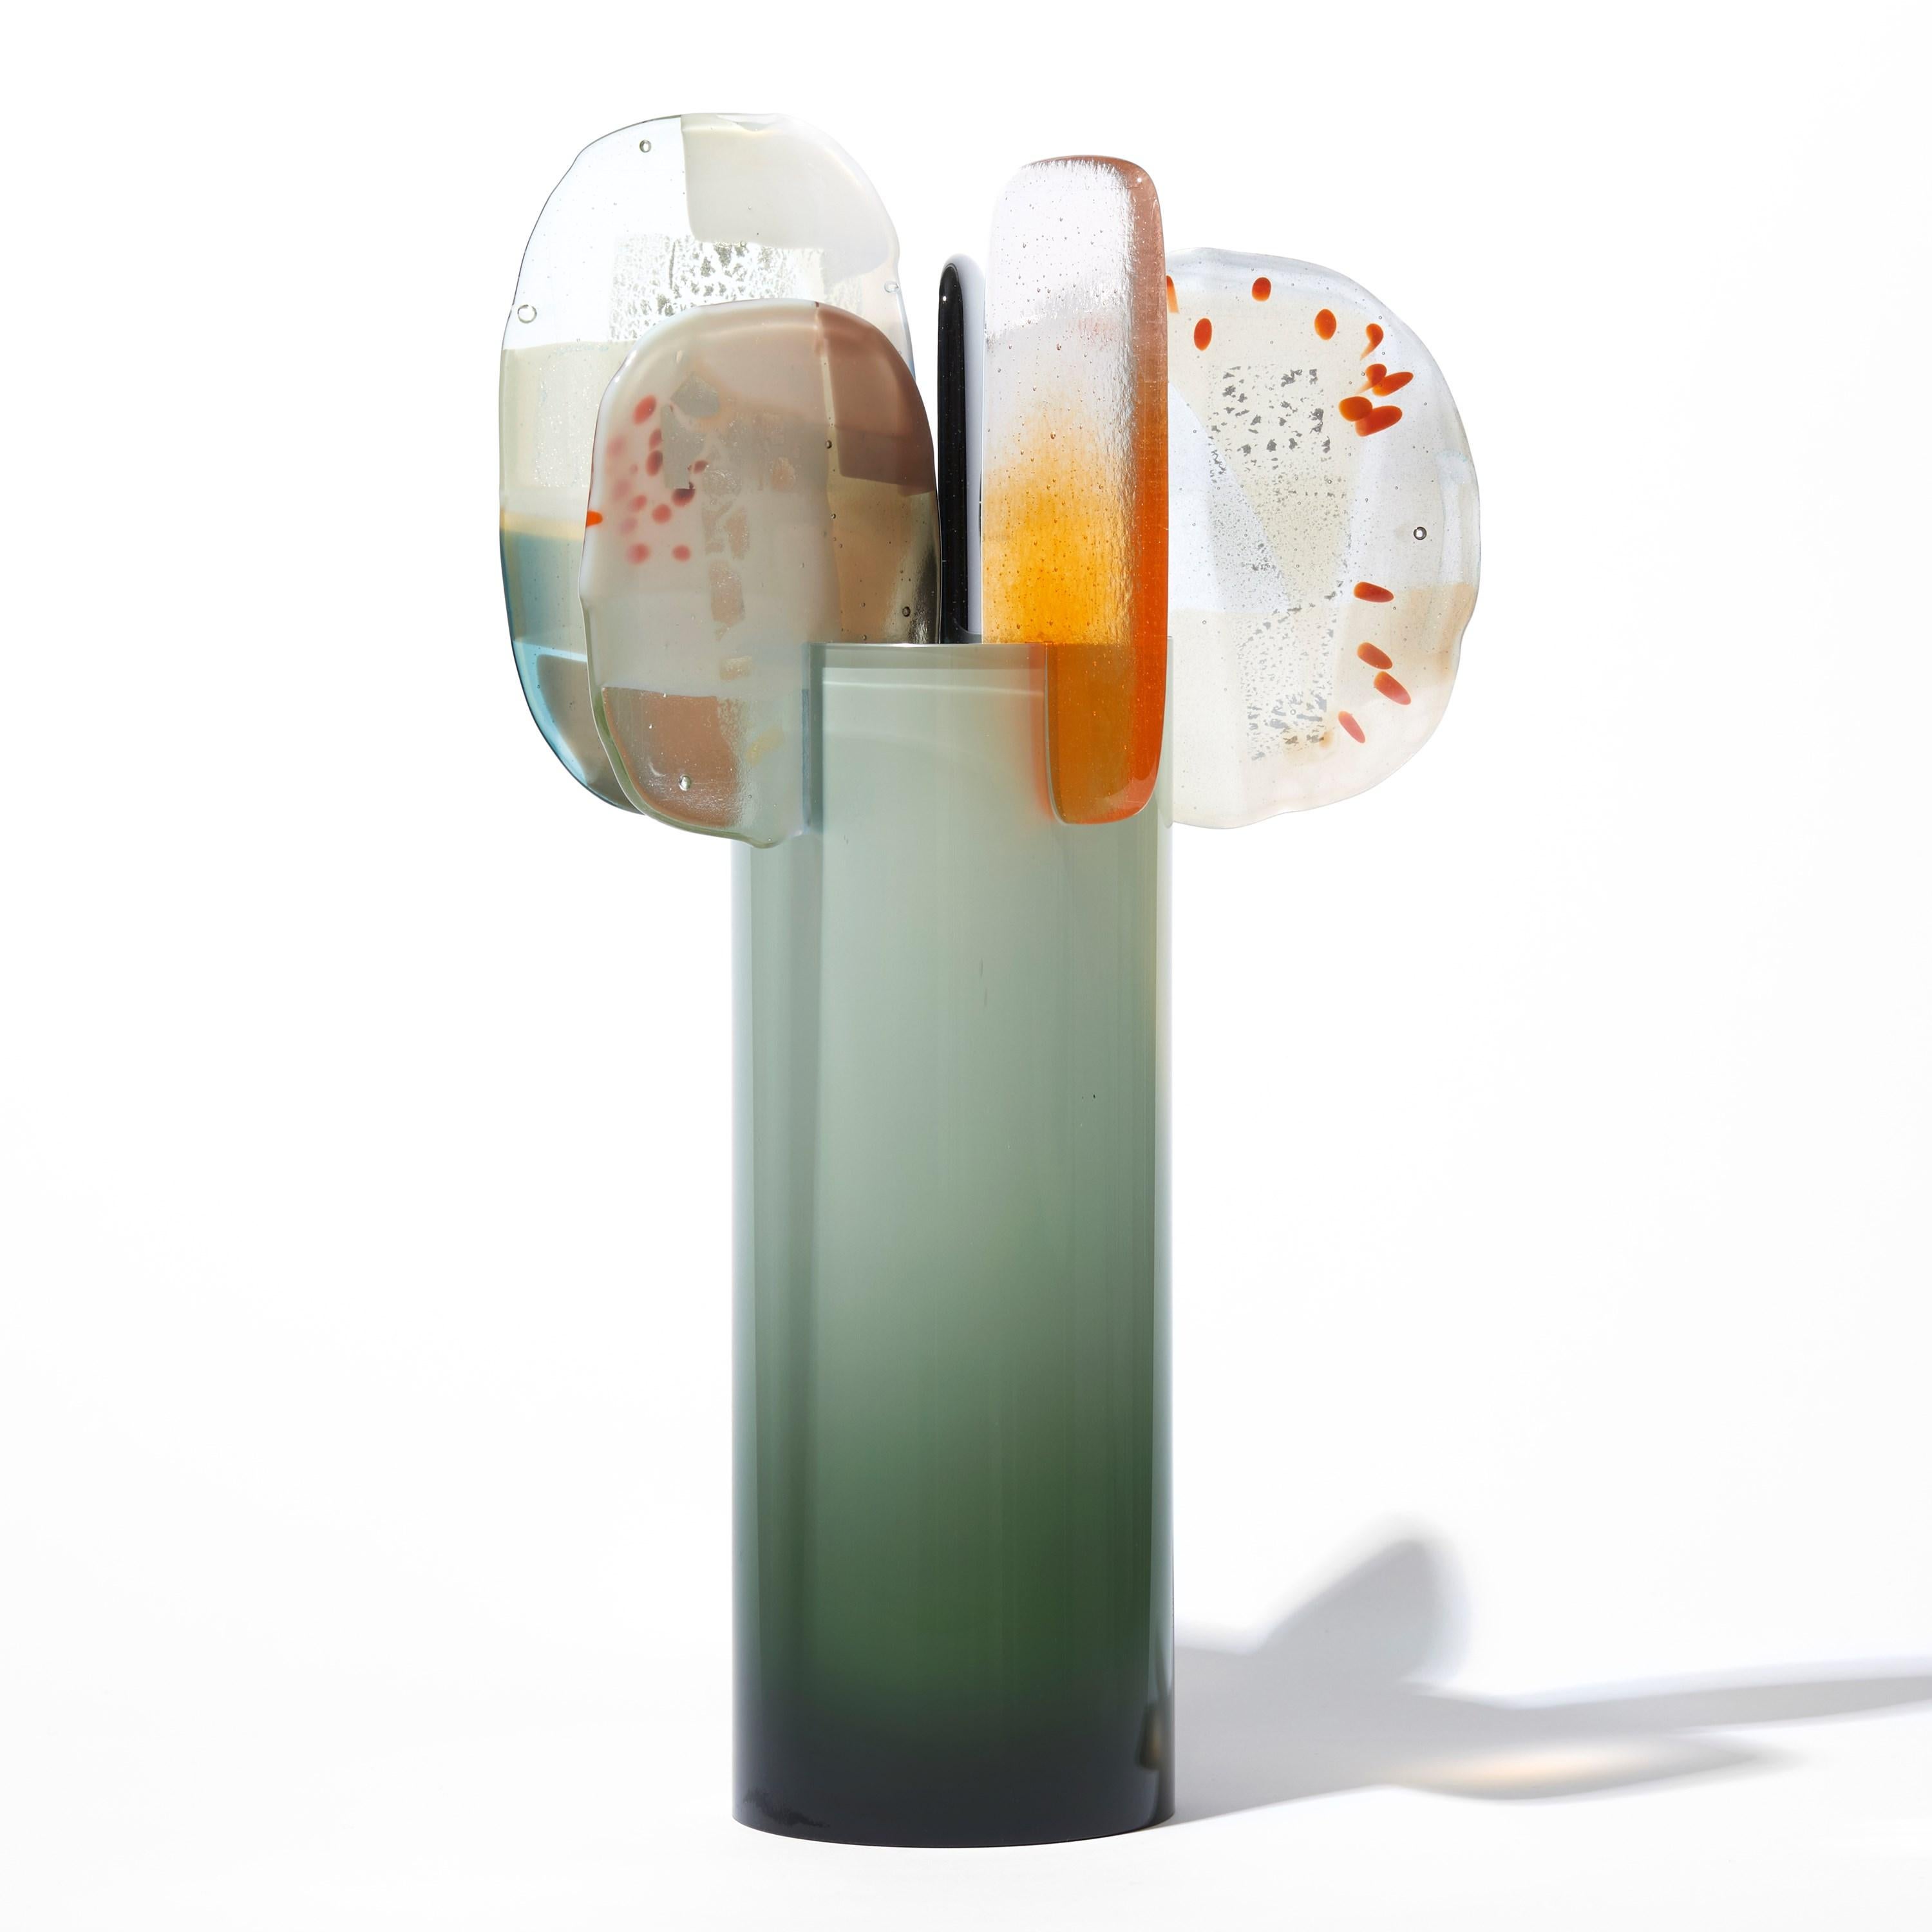 Paradise 08 in Aventurine' is a unique glass sculpture created using hybrid hand-made glass techniques by the British artist Amy Cushing. Combining mouth blown glass with kiln formed glass, each piece within the collection displays a multiple of